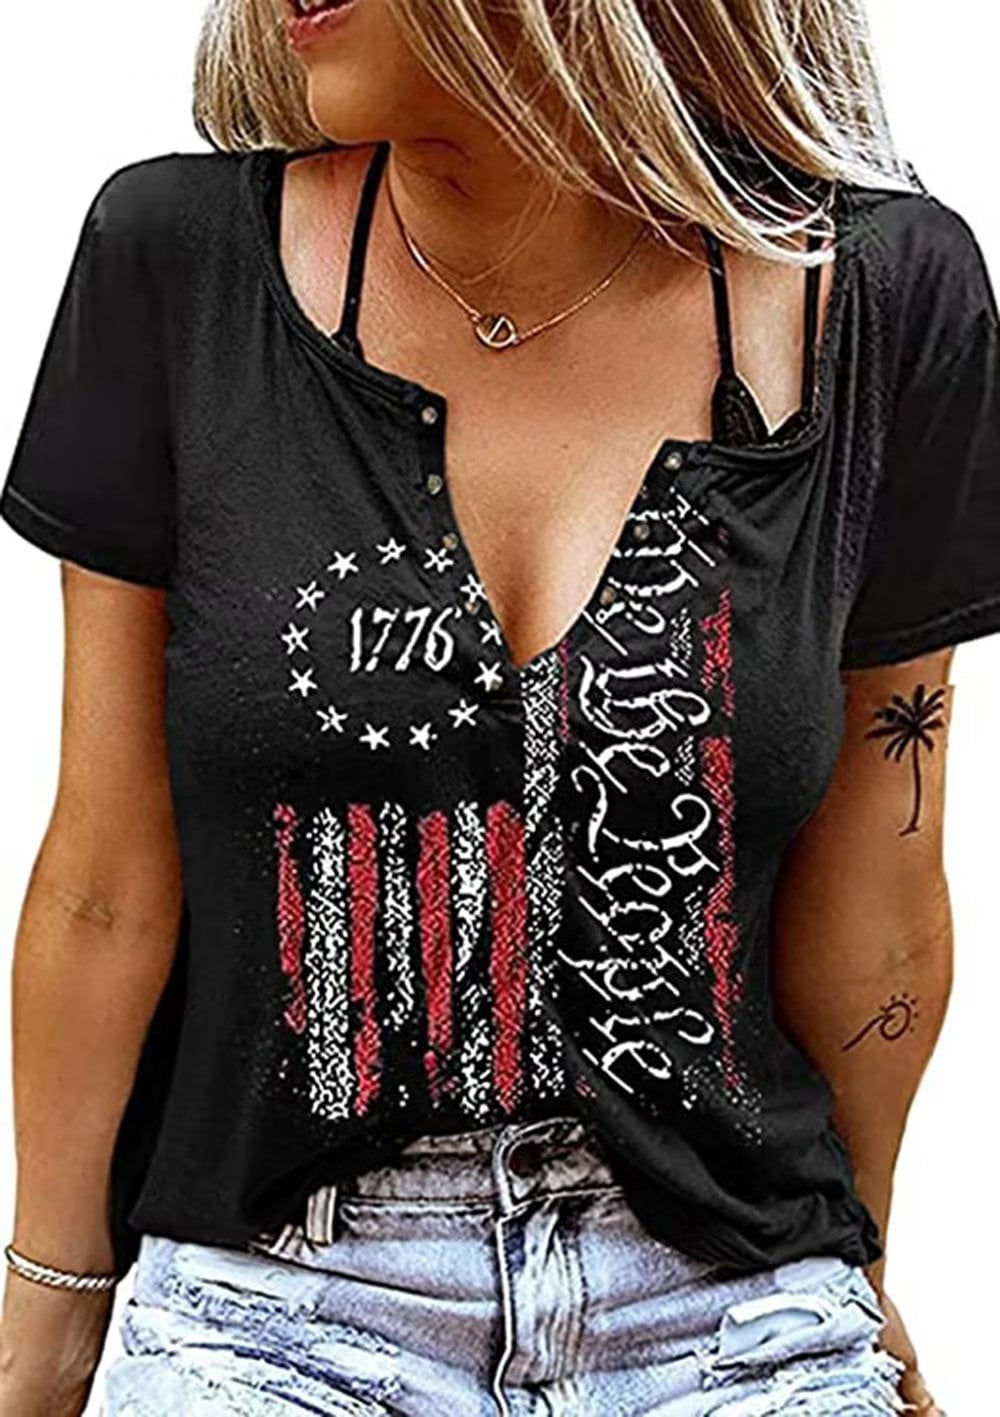 We The People 1776 T Shirt American Flag Patriotic Tee Tops for Women ...